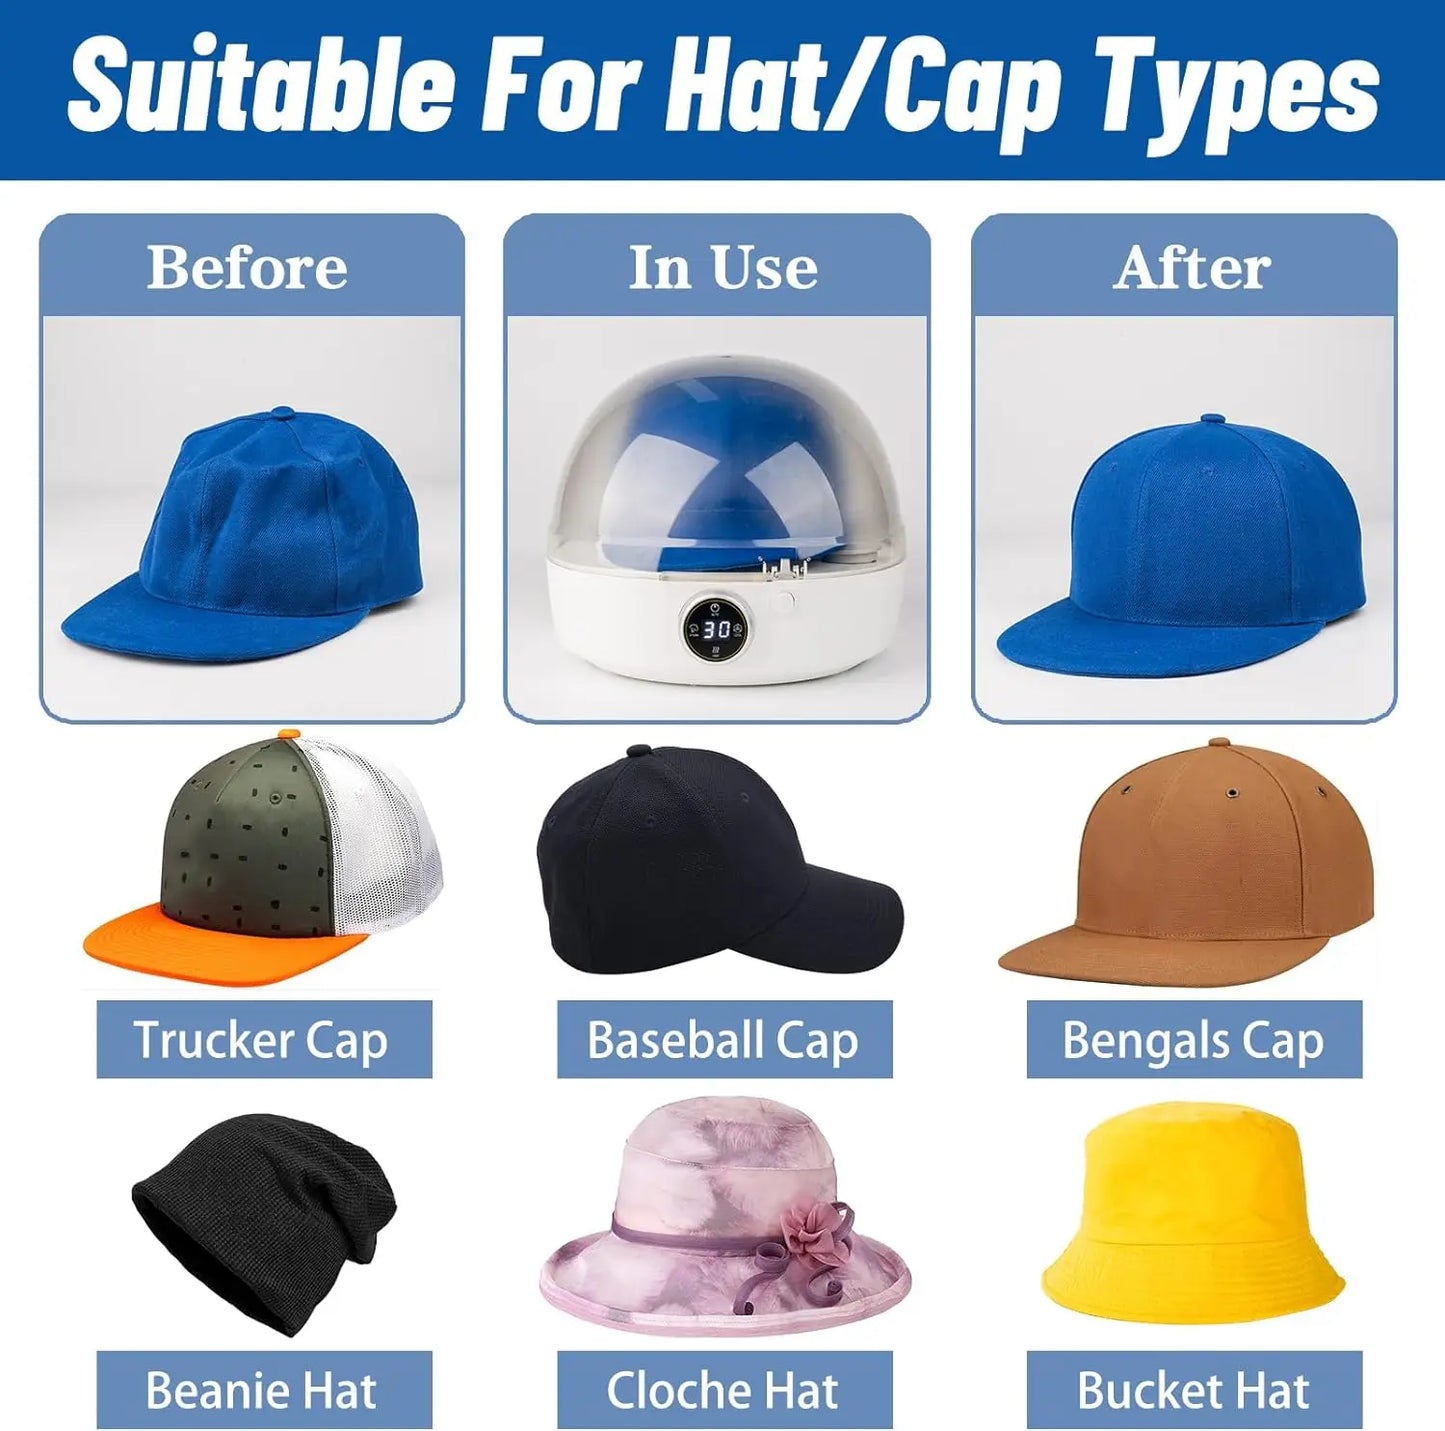 1. Automatic Cap Cleaner with Steam and Dry
2. Steam Cleaning, Ironing, and Drying Machine
3. Dryer for Trucker Hat with Steam Function
4. Bucket Hat Cleaner with Steam Technology
5. Baseball Cap Cleaner and Dryer with Steam